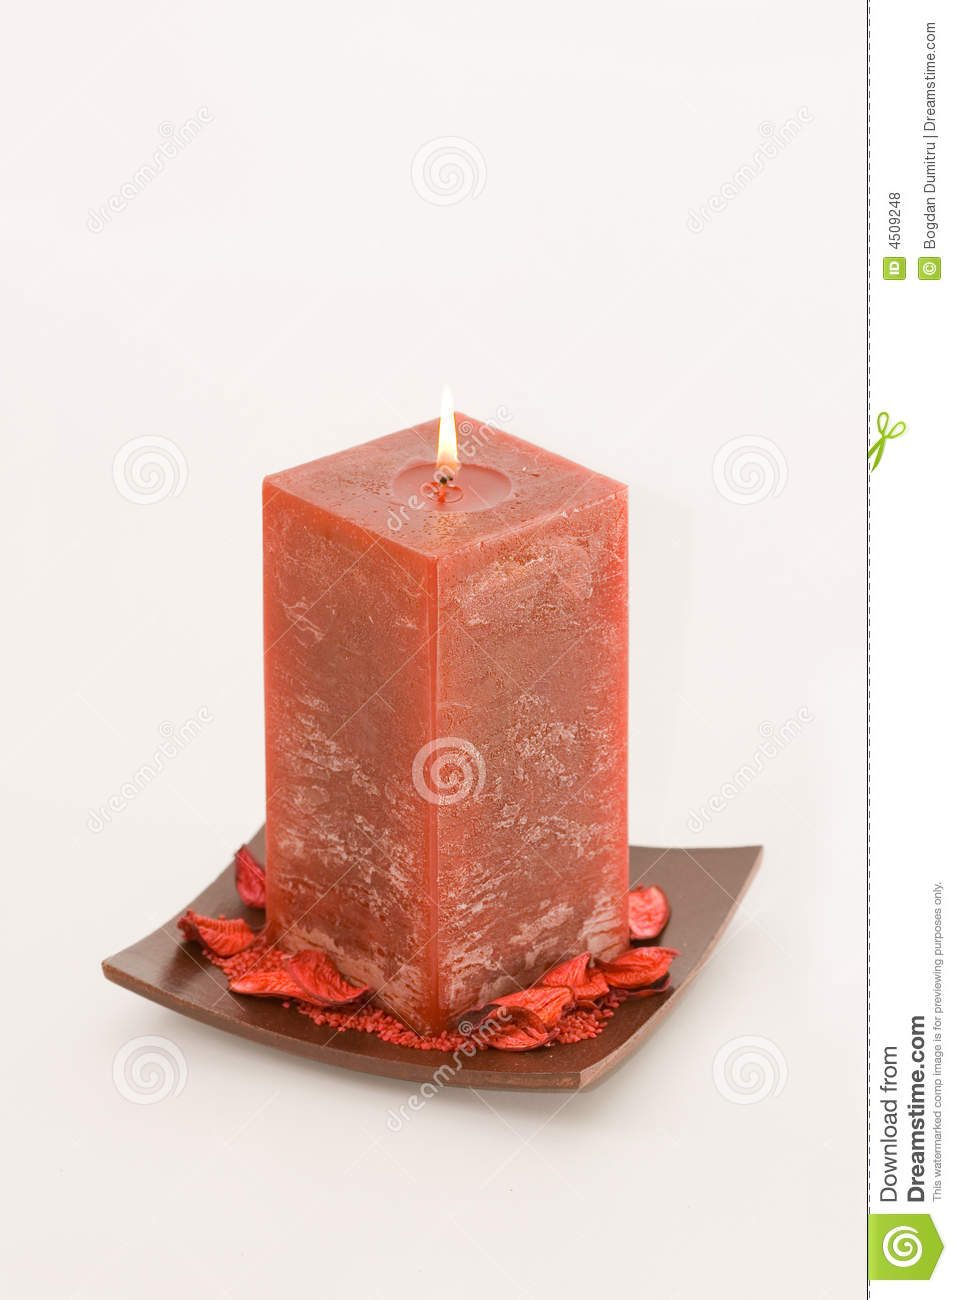 Red Scented Candle Royalty Free Stock Photos   Image  4509248